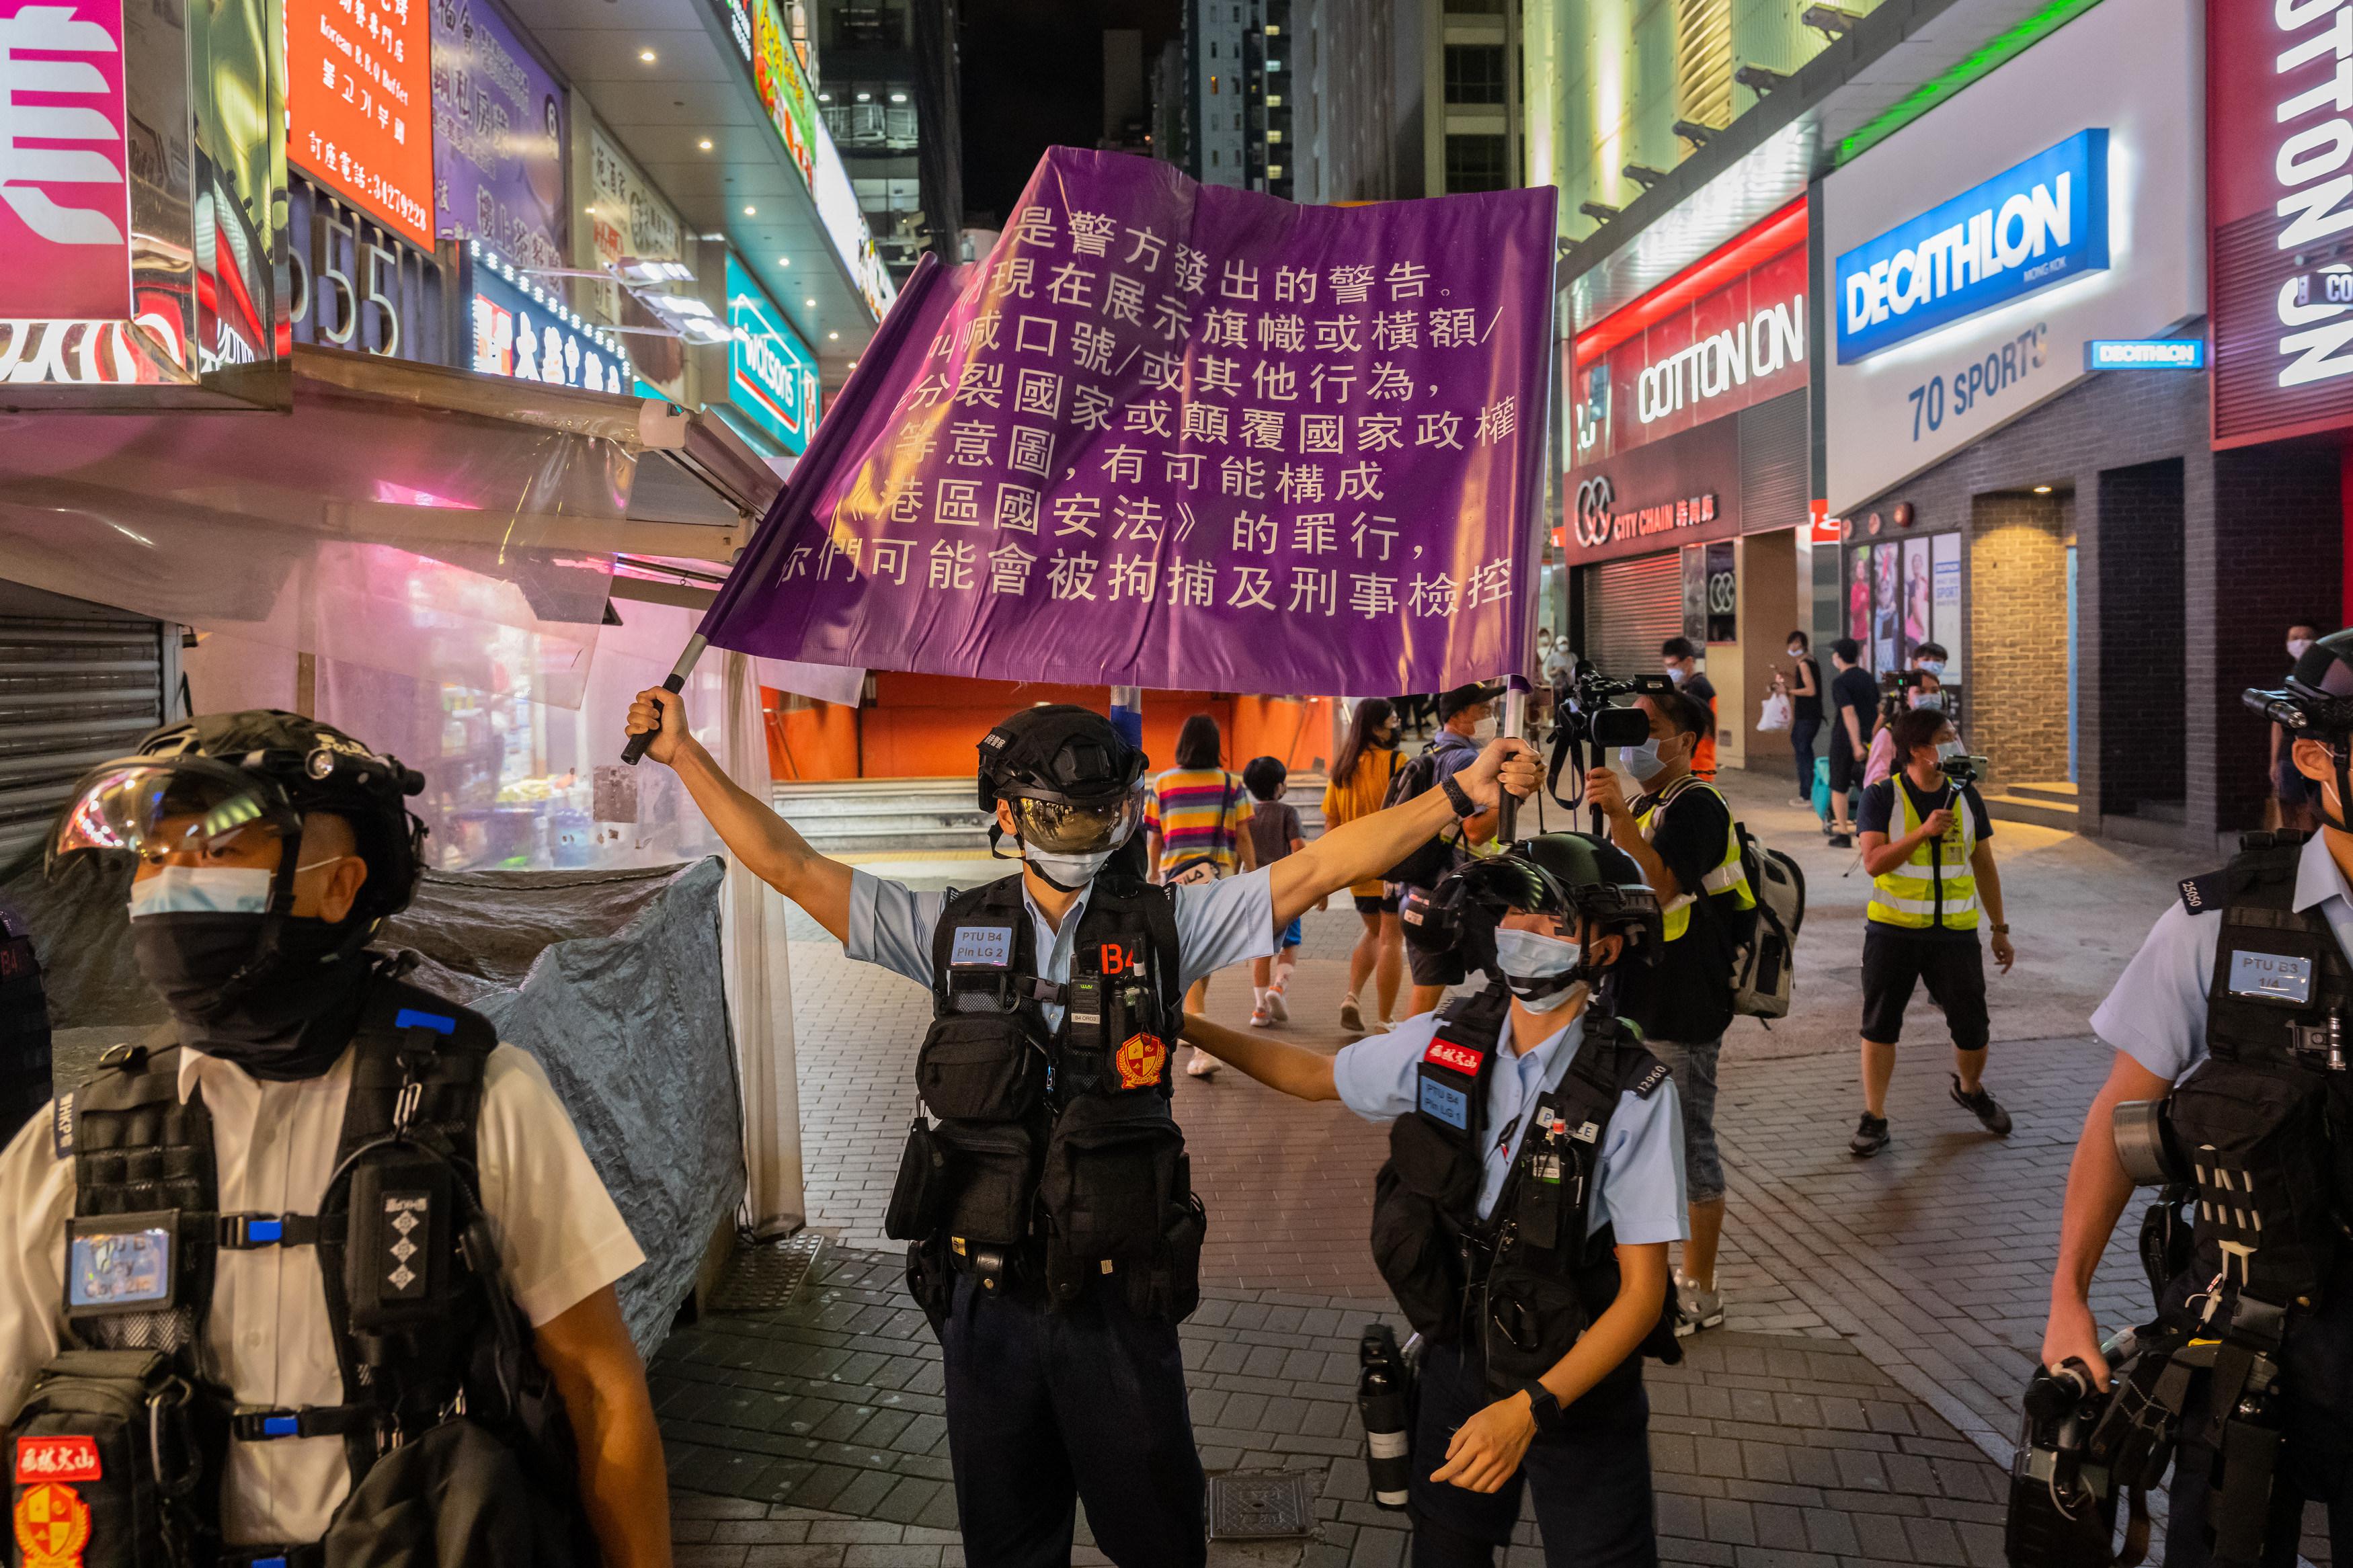 Police raise a purple flag with Chinese characters on it.